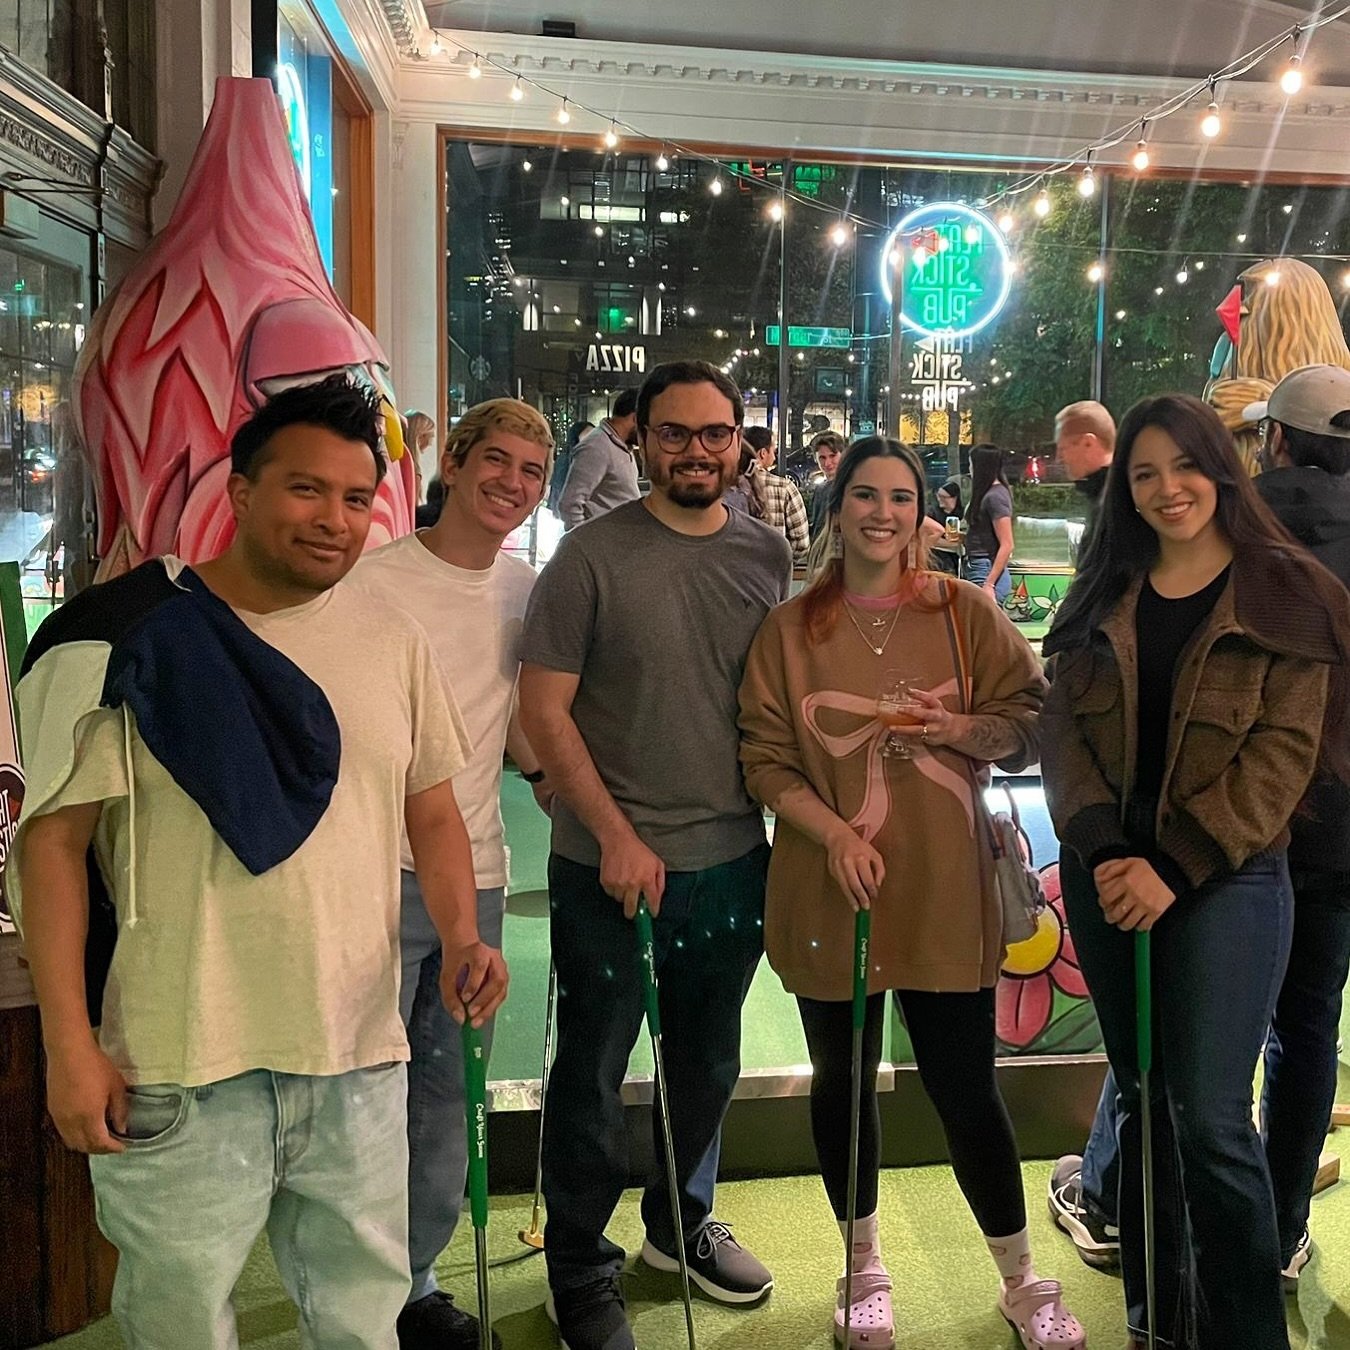 All smiles at our Mixer y Mini Golf event in Seattle last night 😁⛳️

Looking forward to our upcoming events this spring and summer 🤗 

P.S. Spent an hour trying to come up with a way to use &ldquo;putt&rdquo; in the caption y no salio nada so, if y